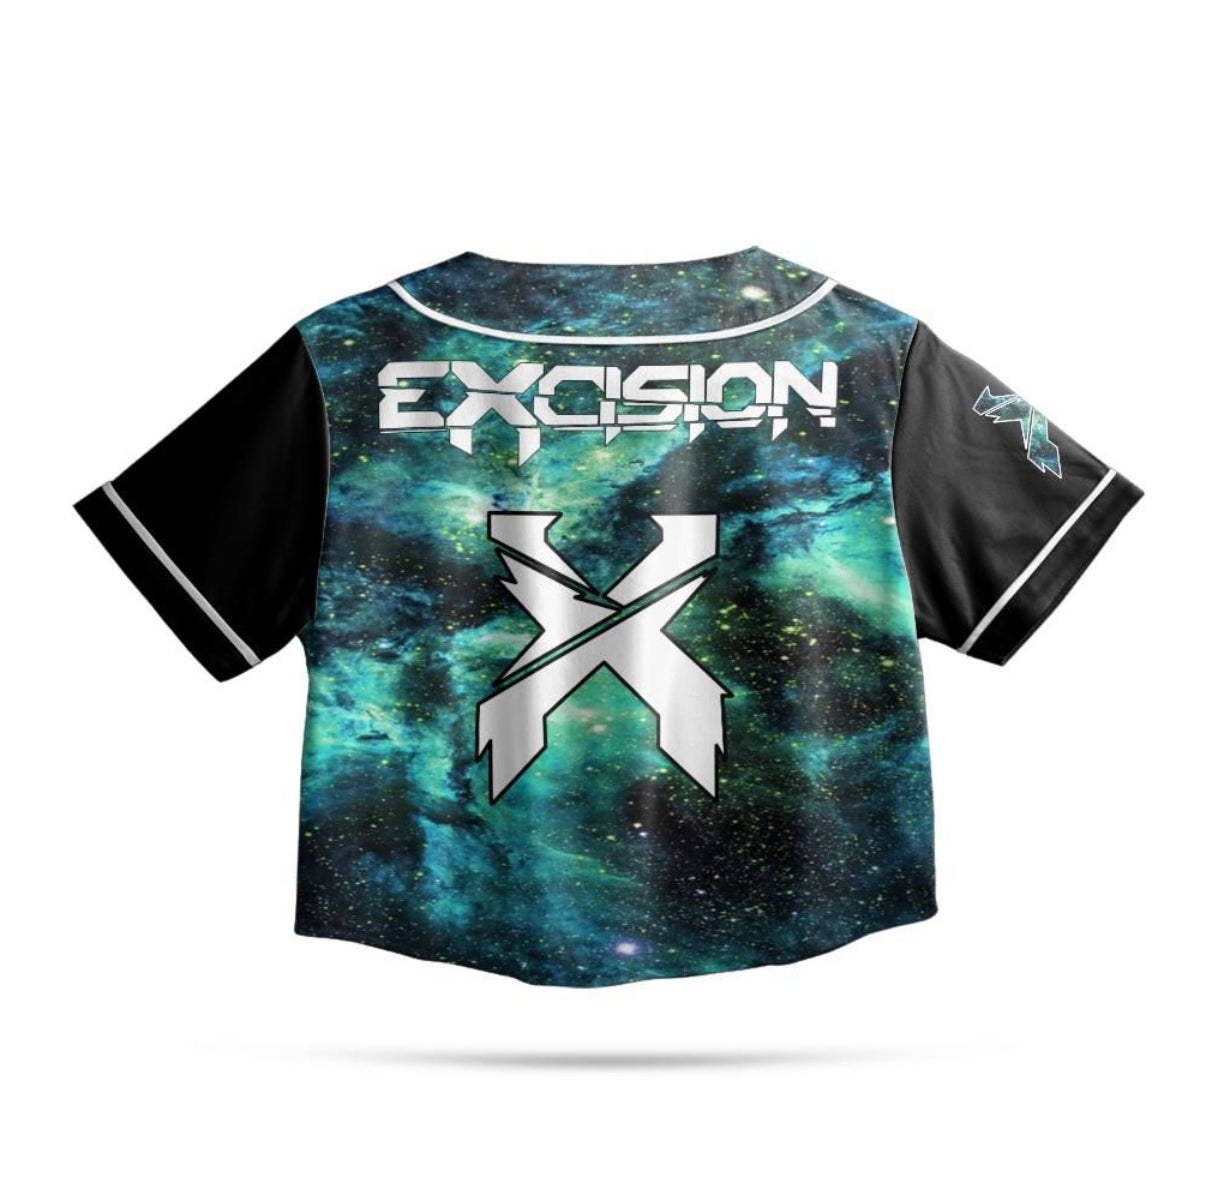 Excision Crop Jersey (Blue/Green Galaxy) – Litty Kitty Creations